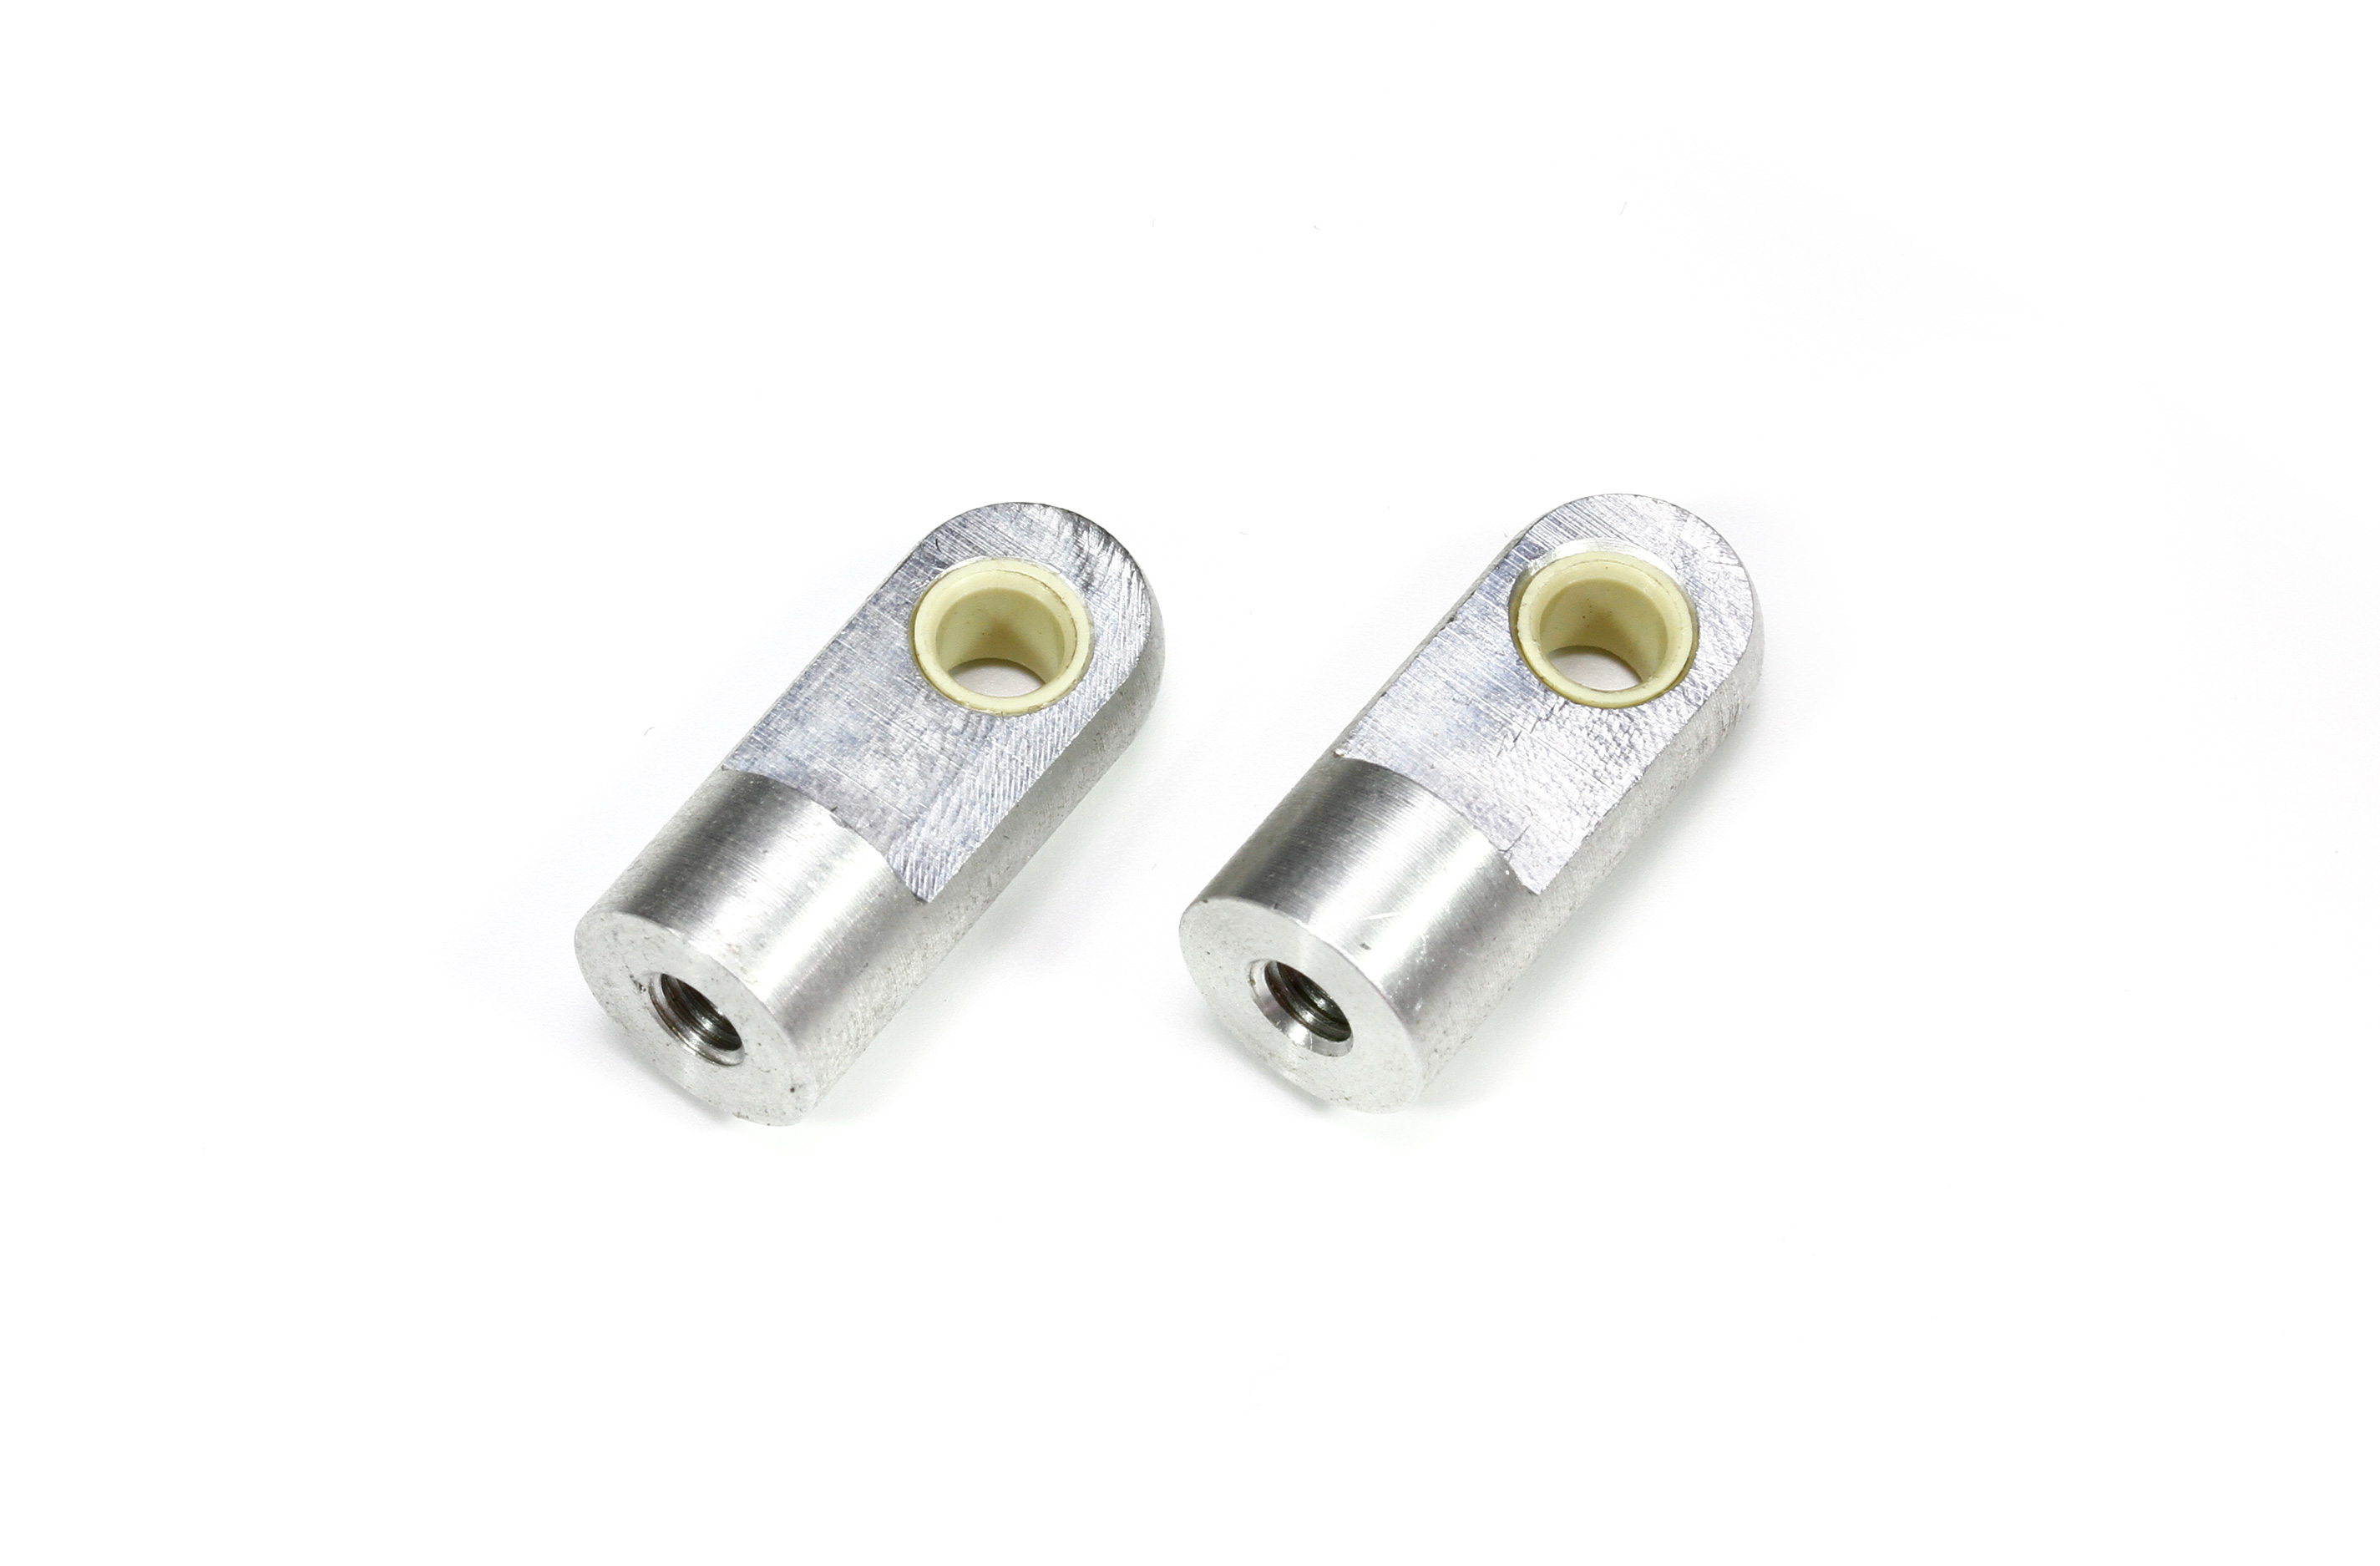 y0976 Alloy shock shaft end, long or short to choice